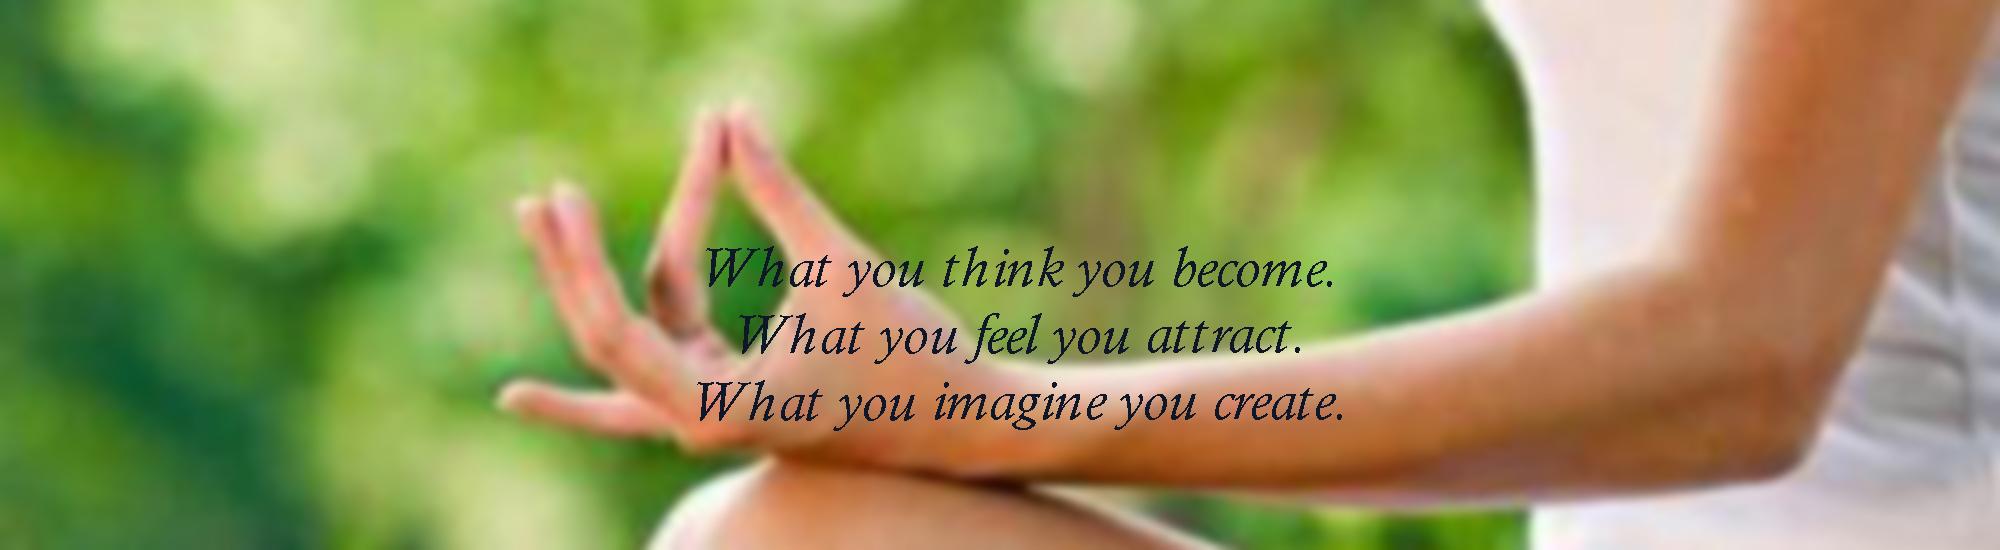 What you think you become. What you feel you attract.